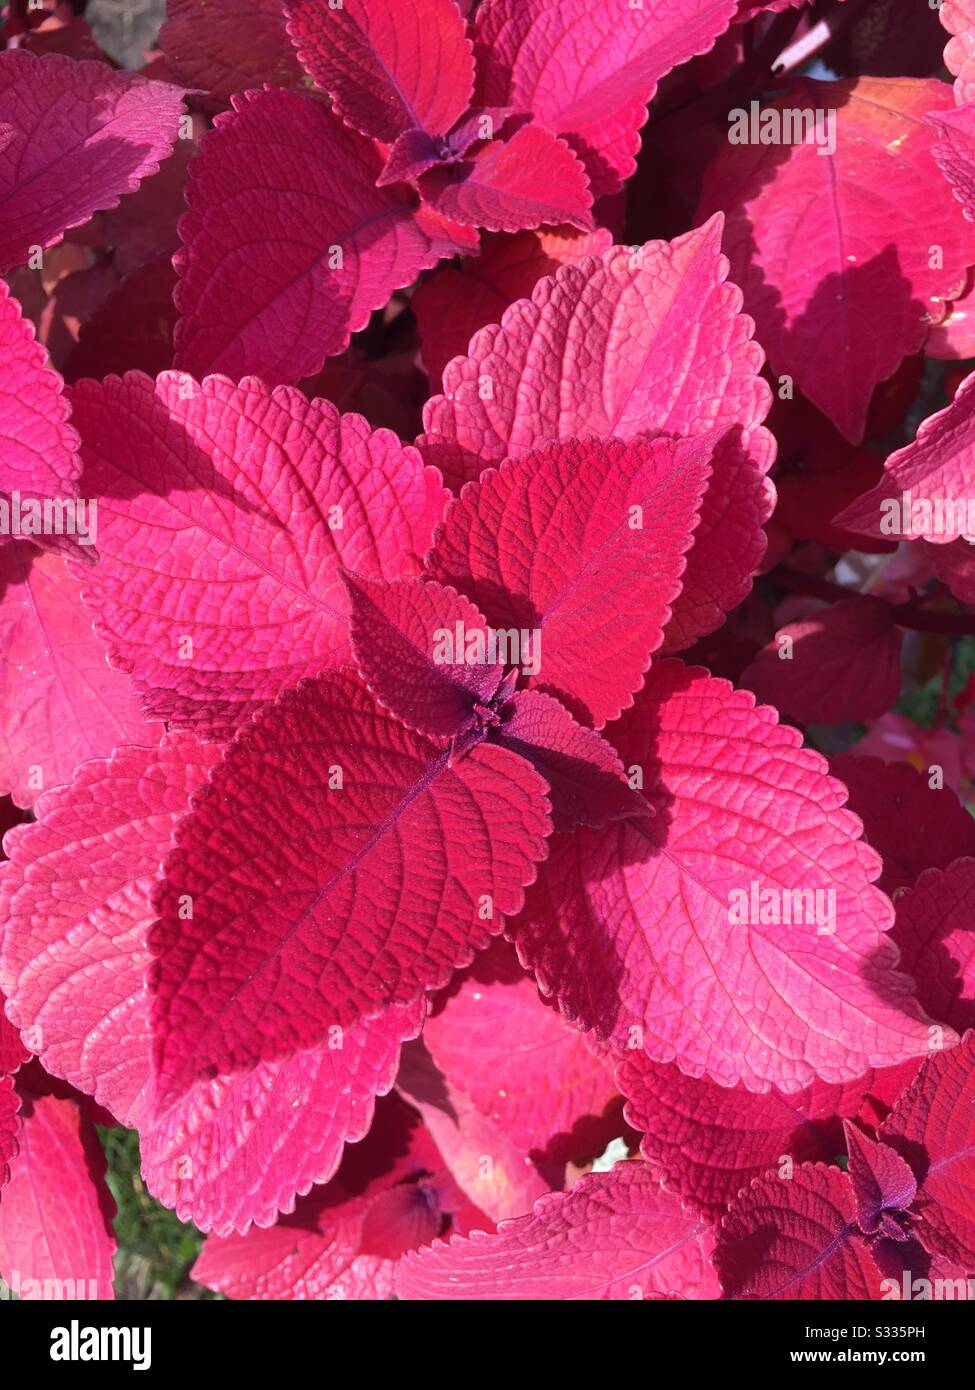 Colourful pink plant Stock Photo